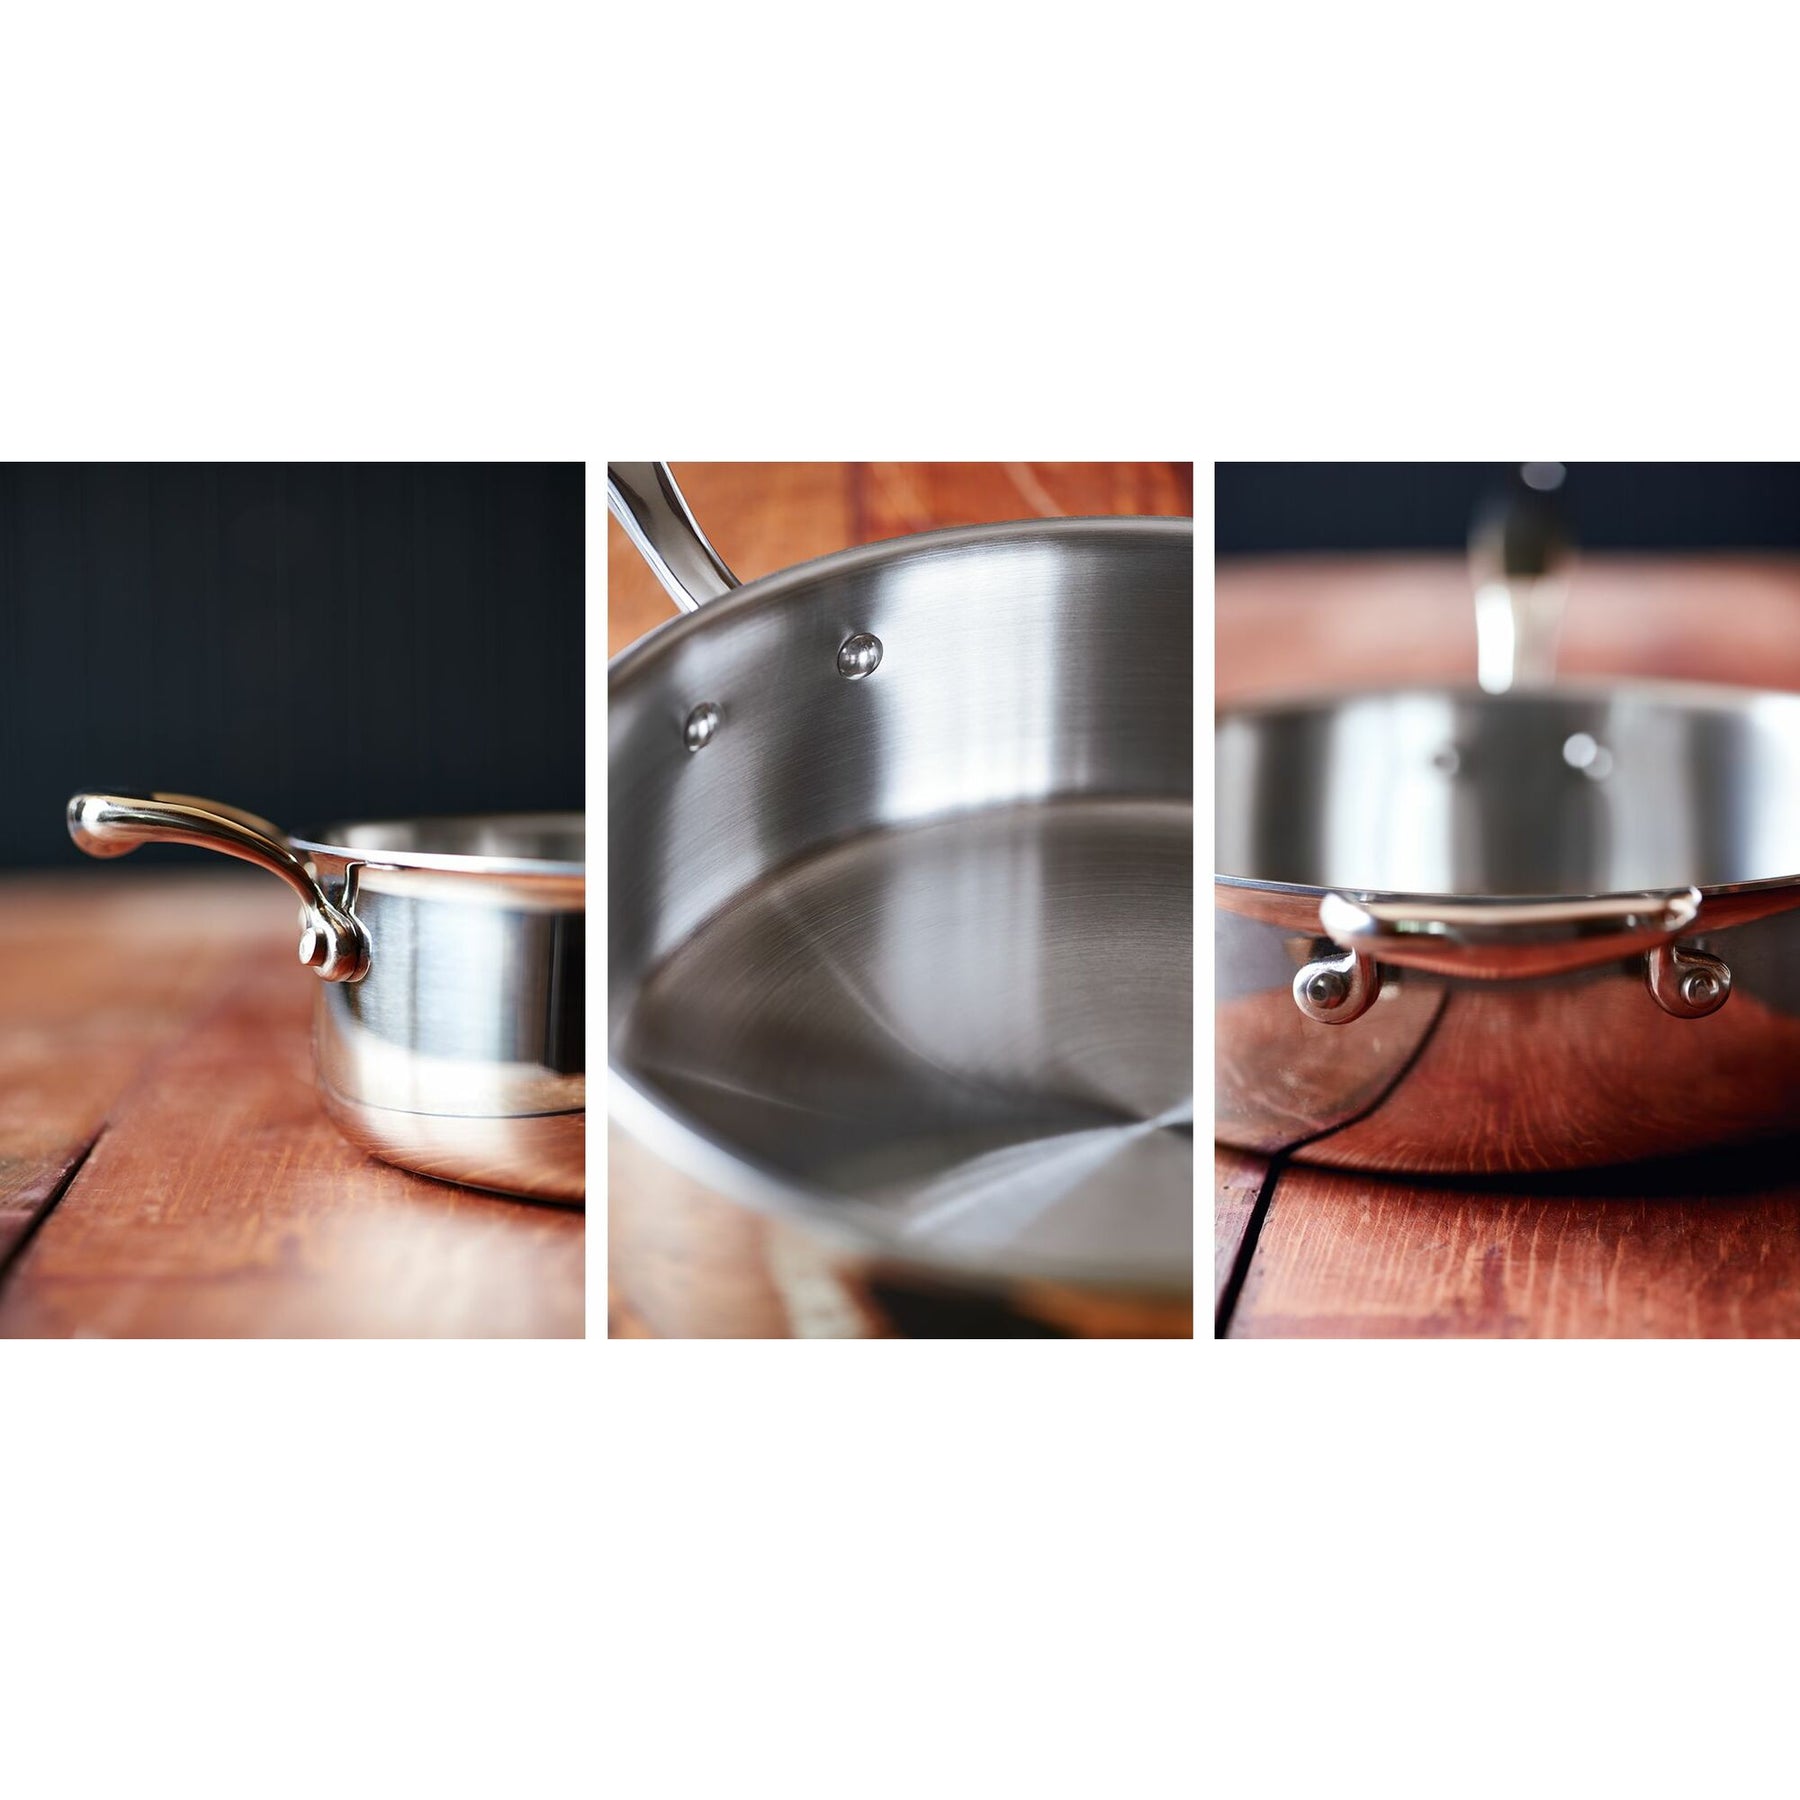 Heritage Steel 4 Quart Sauce Pot - Titanium Strengthened 316Ti Stainless  Steel with 5-Ply Construction - Induction-Ready and Fully Clad, Made in USA